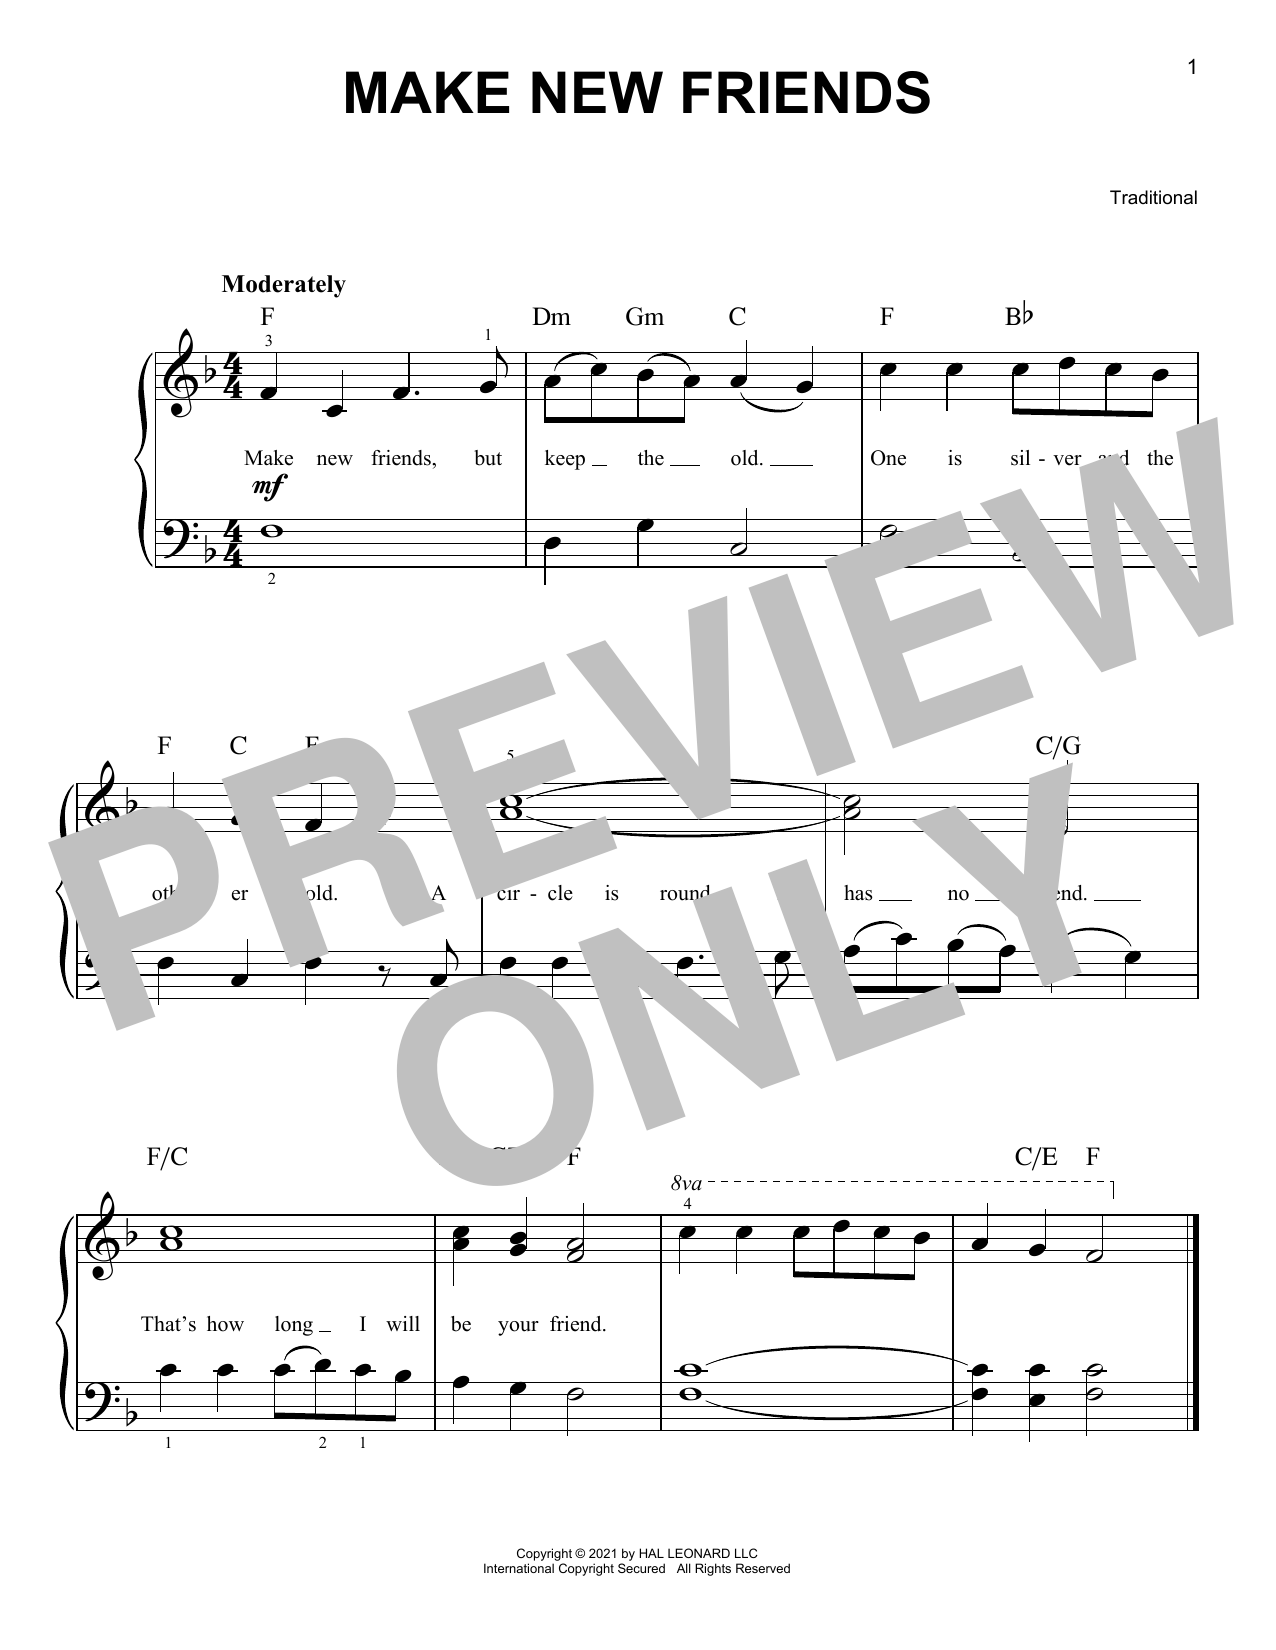 Download Traditional Make New Friends Sheet Music